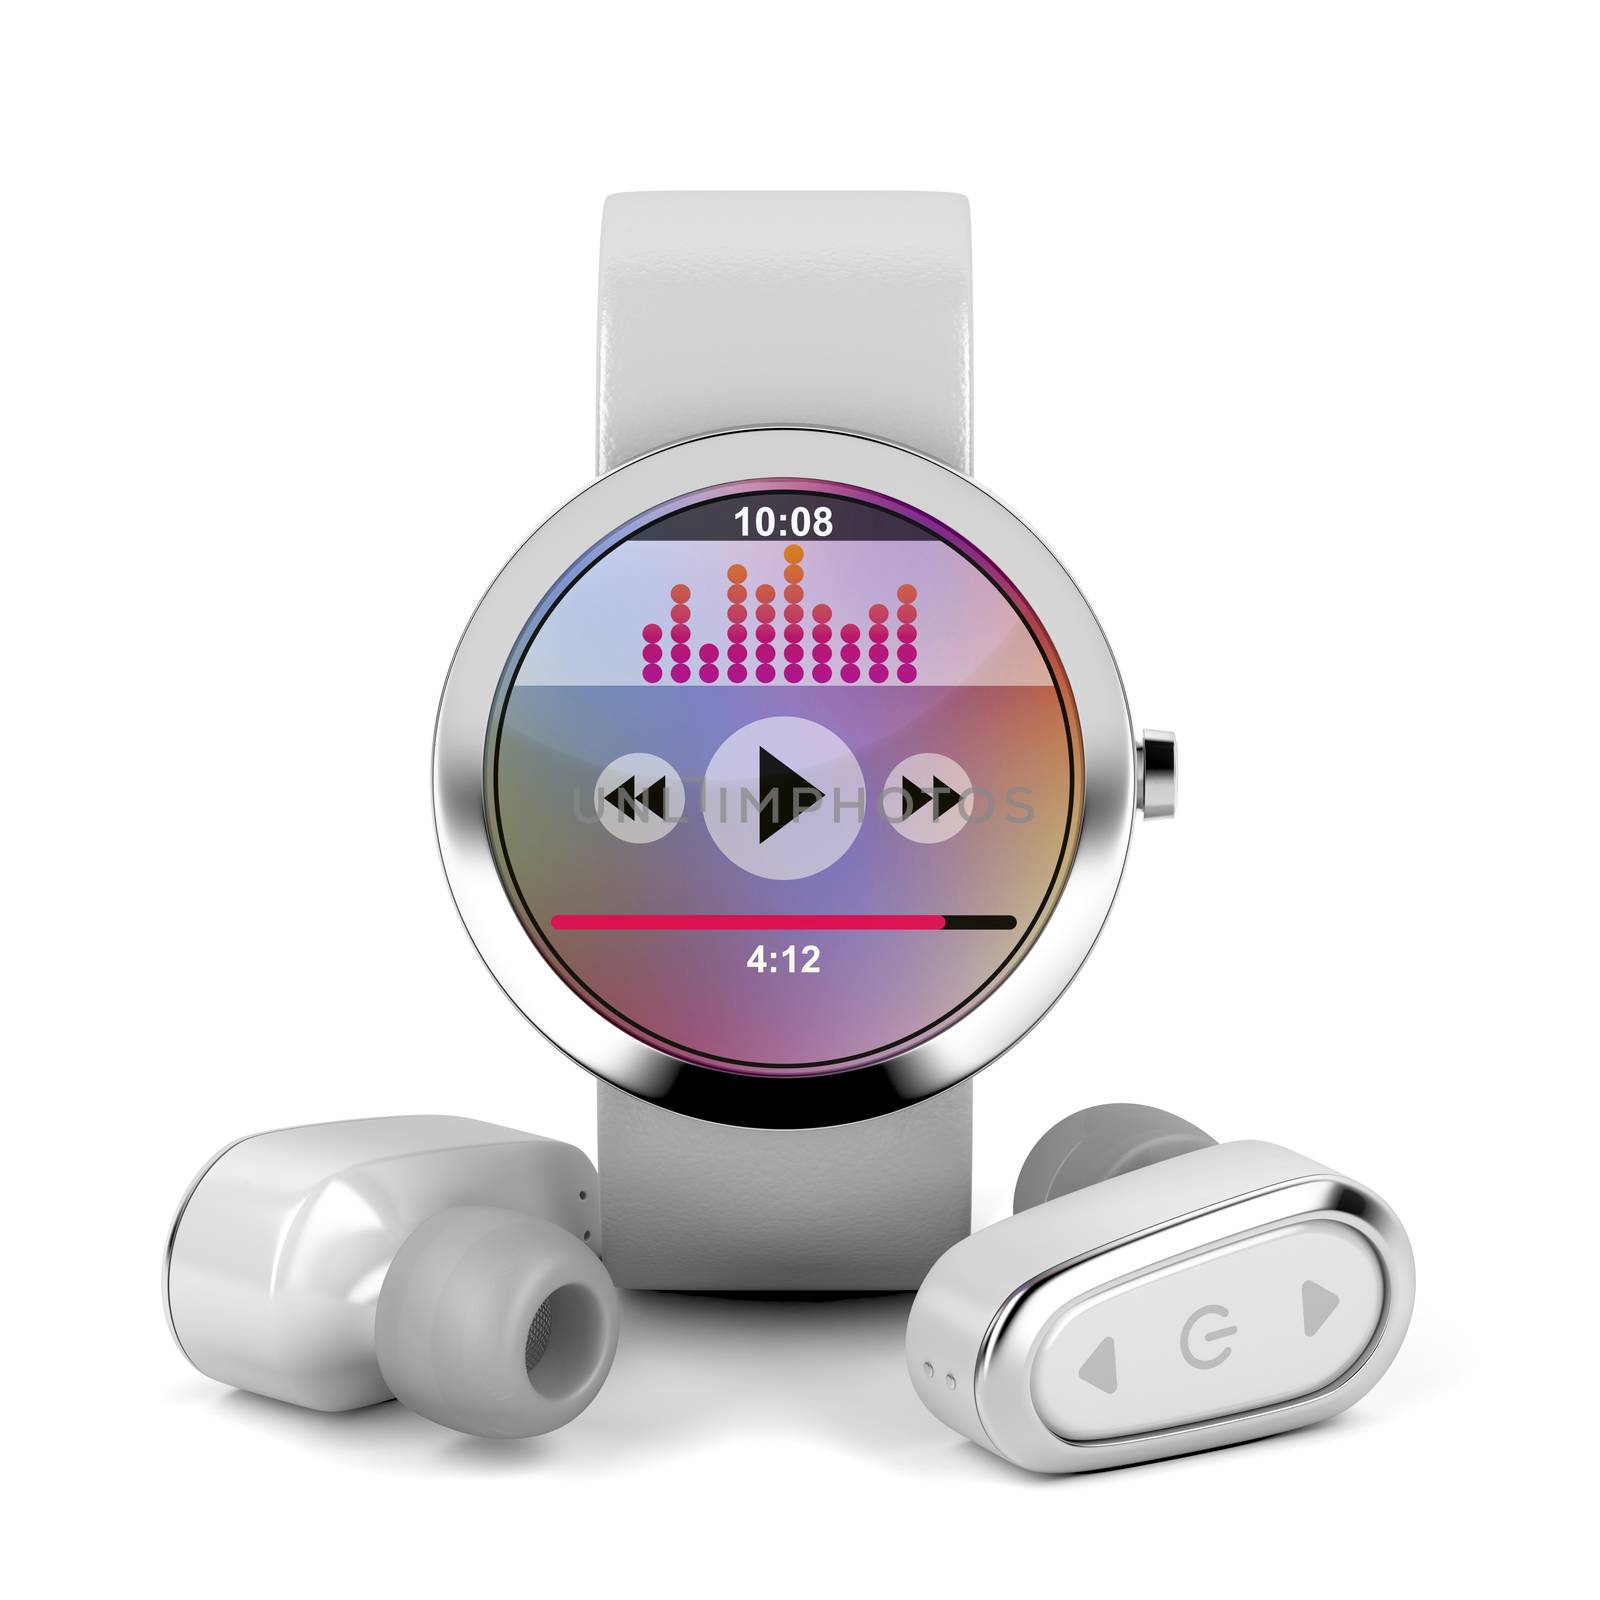 Wireless earphones and smart watch by magraphics